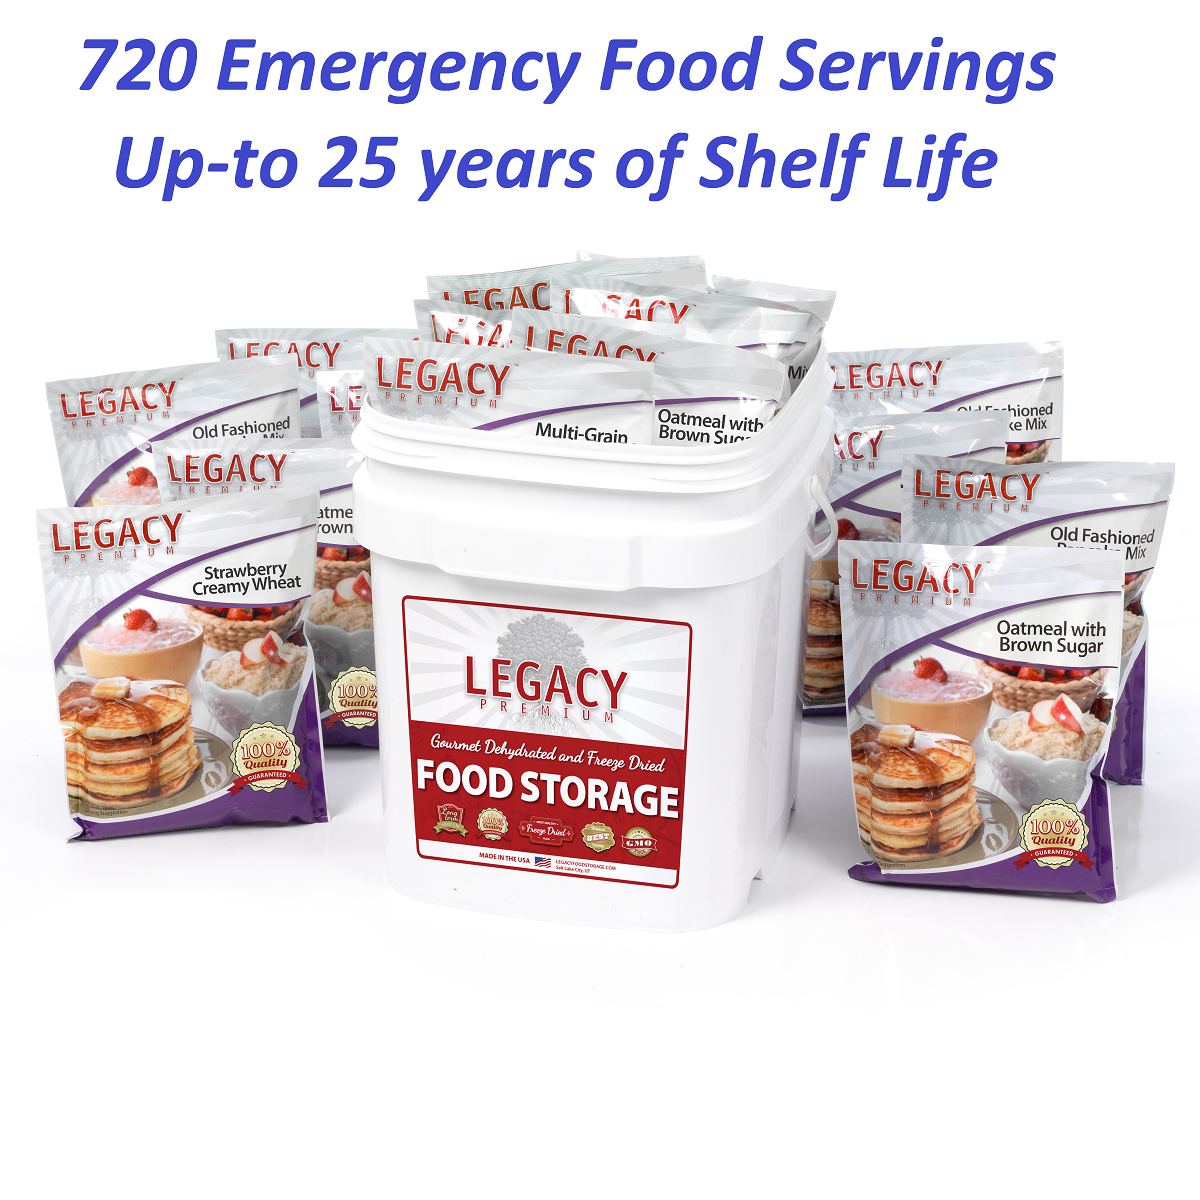 Storing Food Safely in the Summer Heat – Be Prepared - Emergency Essentials